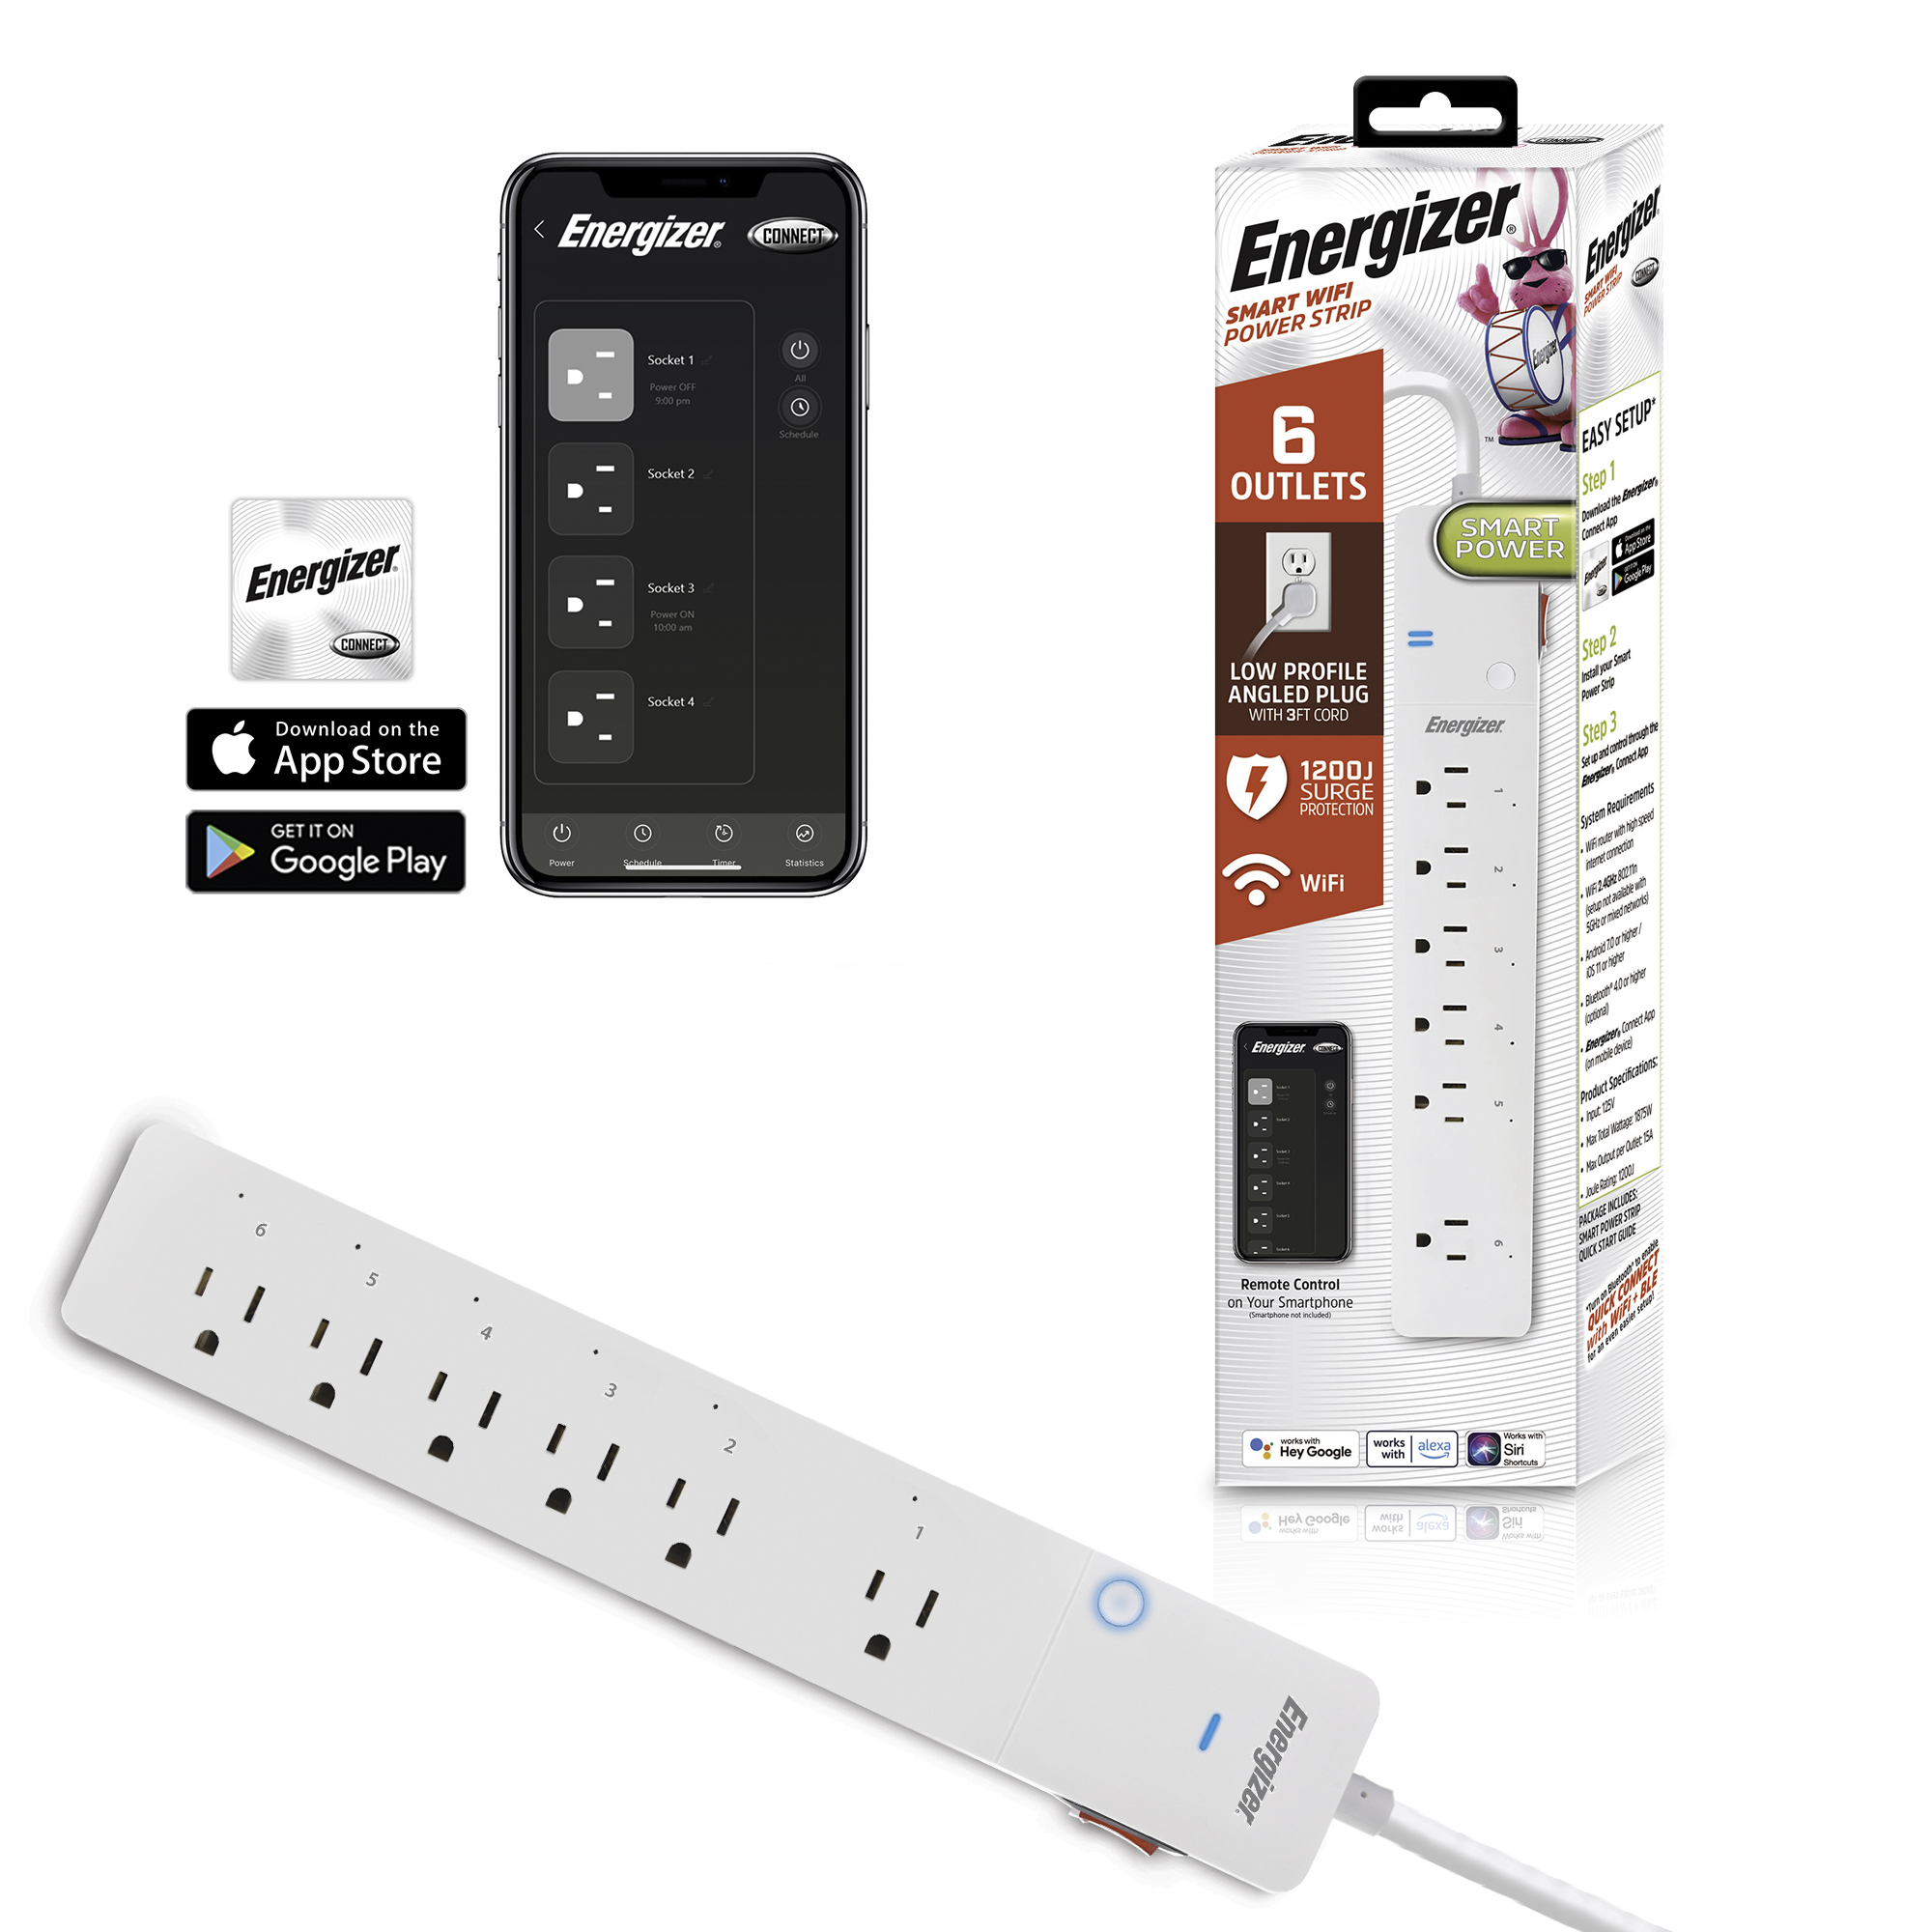 Heavy Duty 20-Amp 2400-Watt Appliance Surge Protector Smart Plug with  outlet s